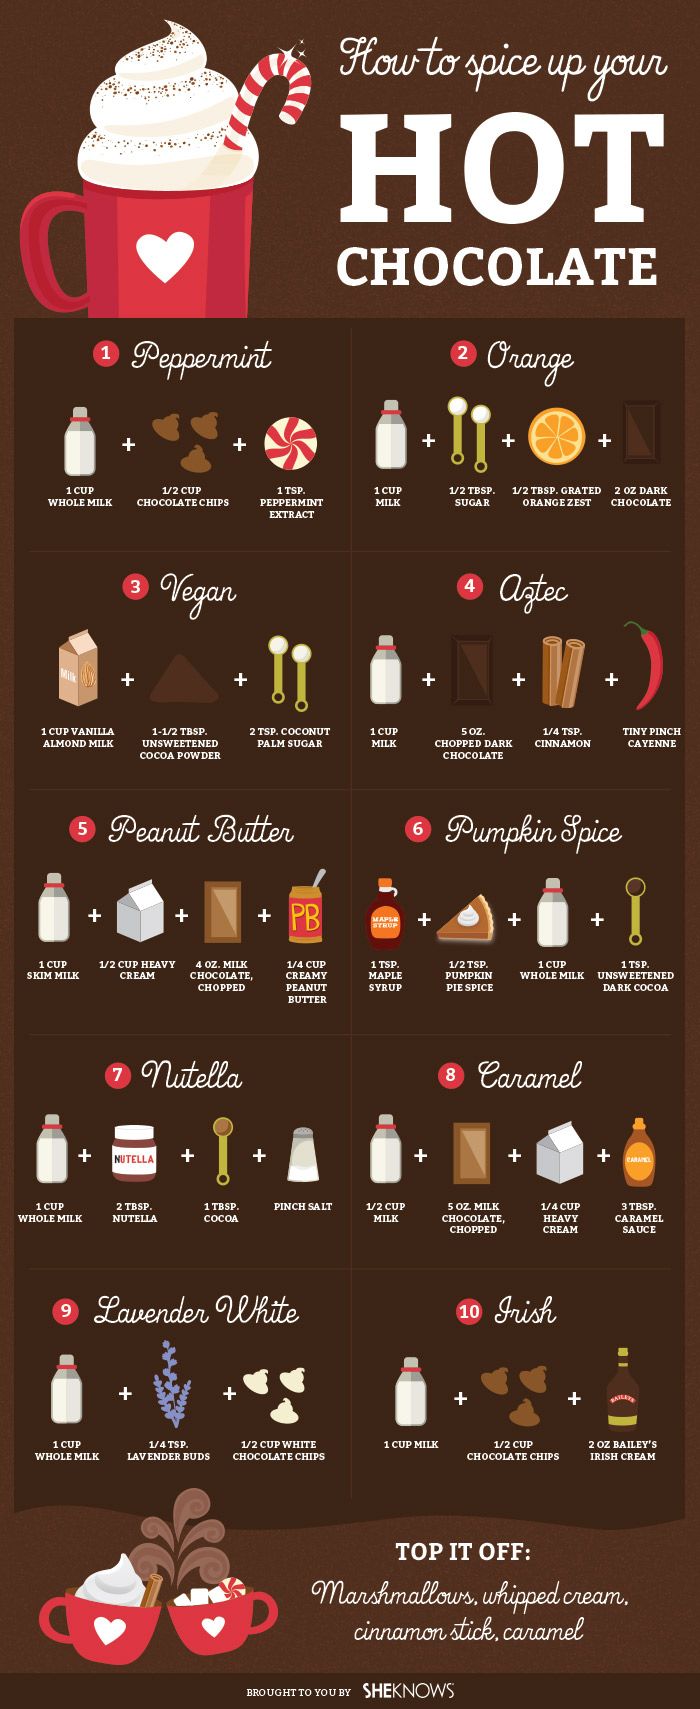 How to spice up your hot chocolate